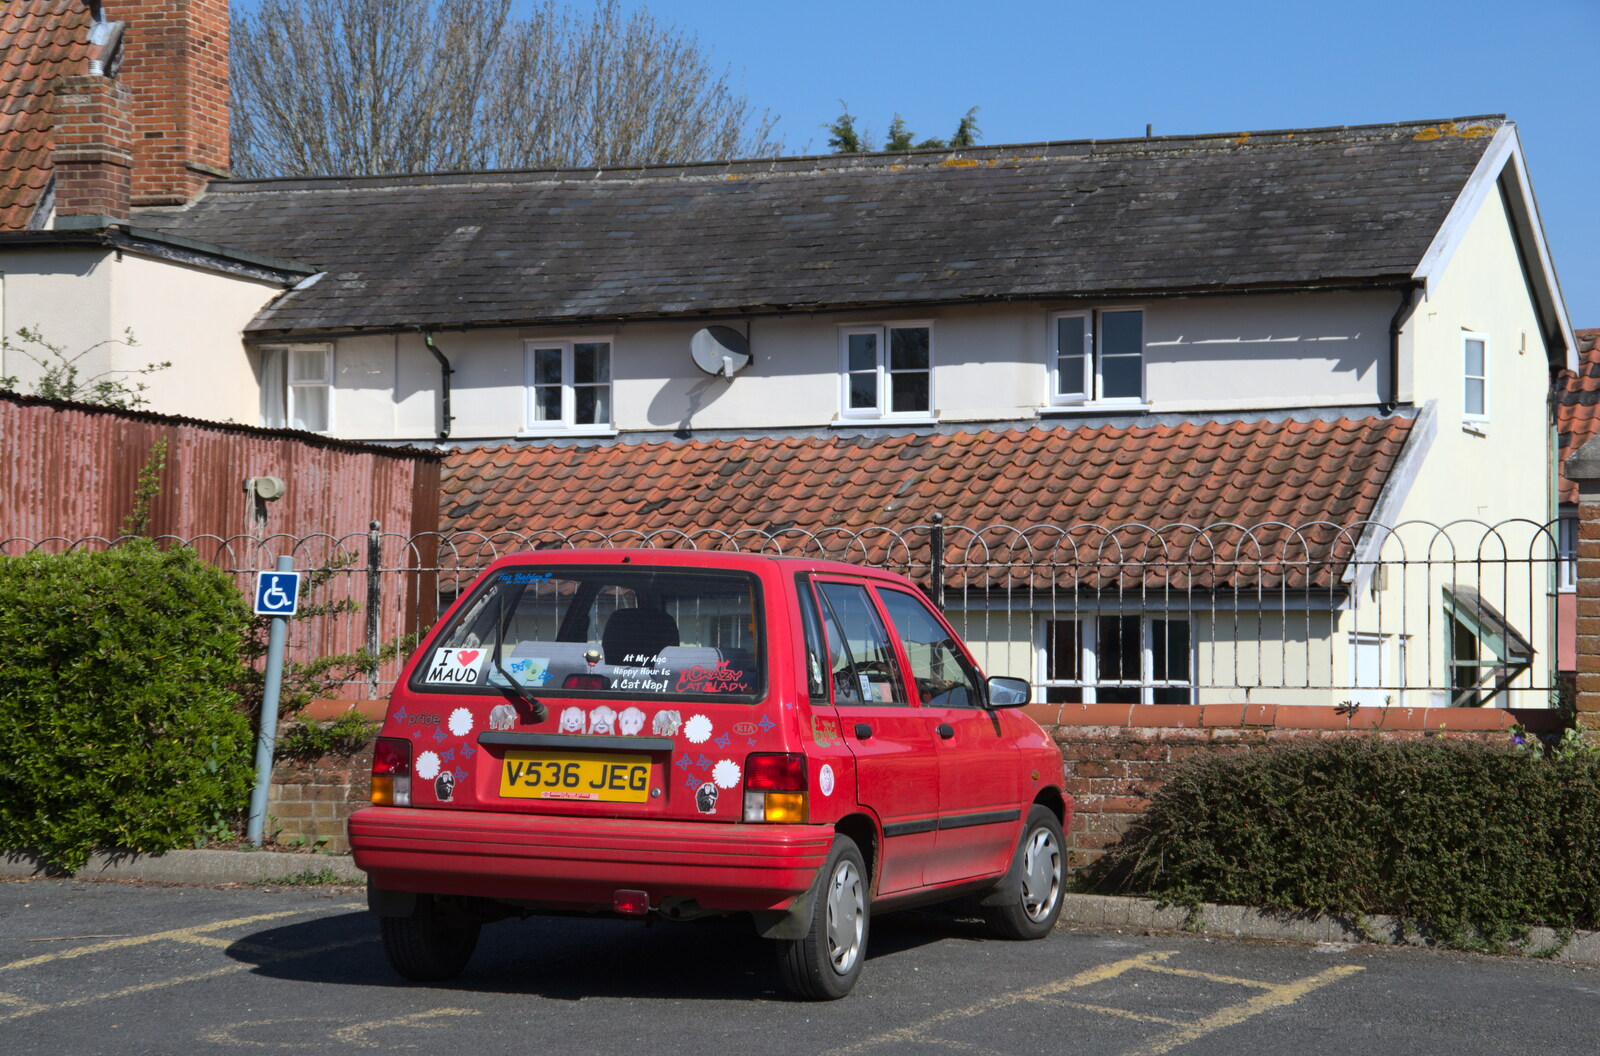 The 'Crazy cat woman' car in Eye from A Weekend Camping Trip in the Garden, Brome, Suffolk - 11th April 2020